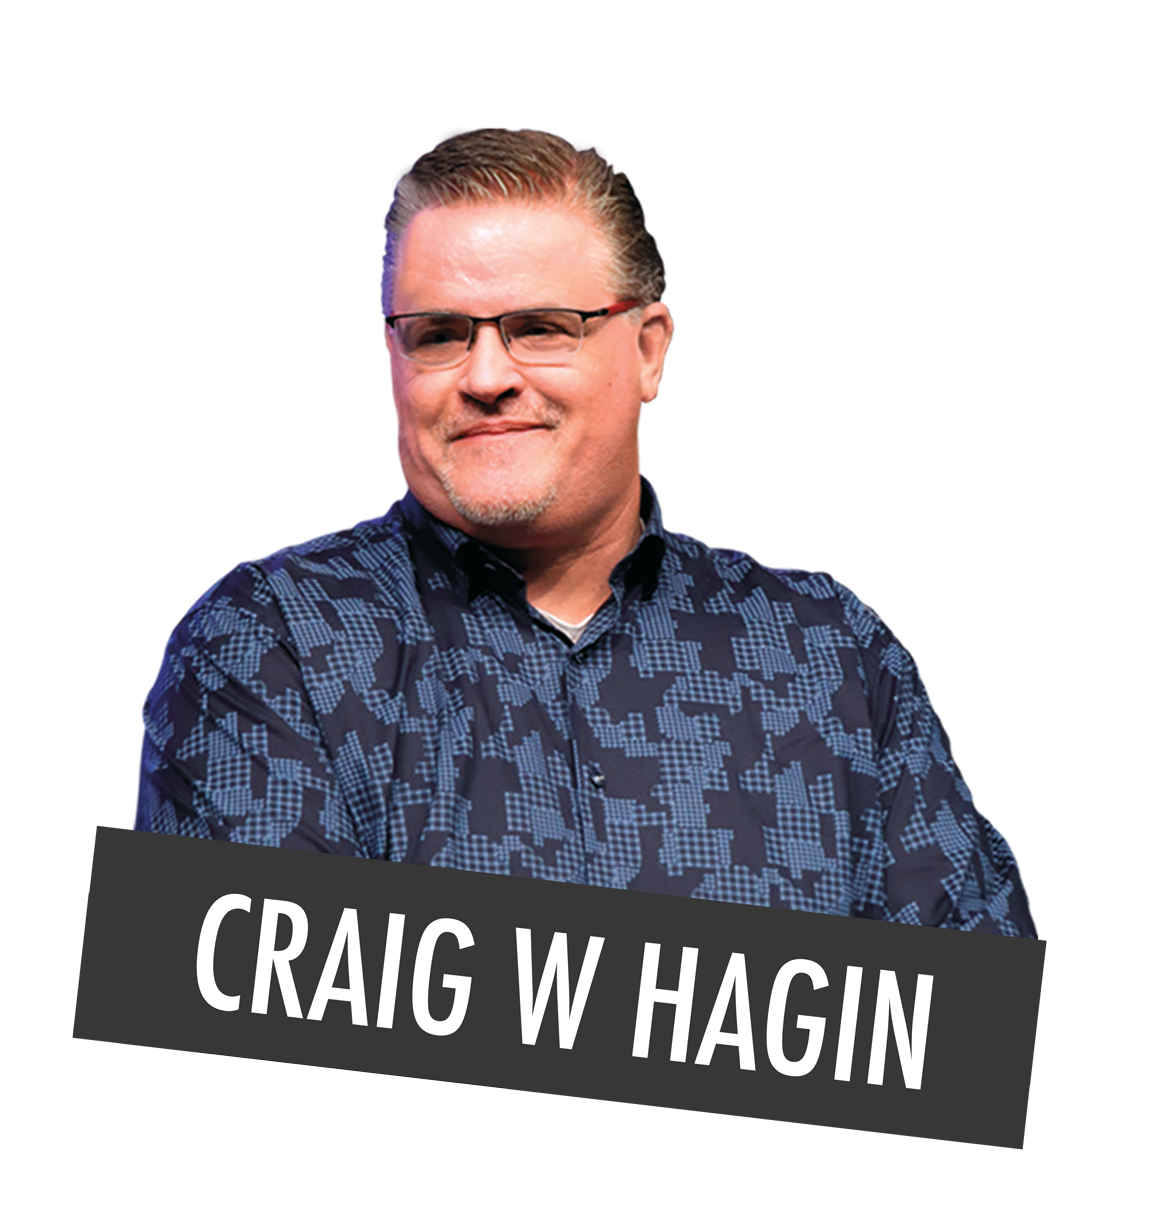 Craig W. Hagin Image for A Call to Arms